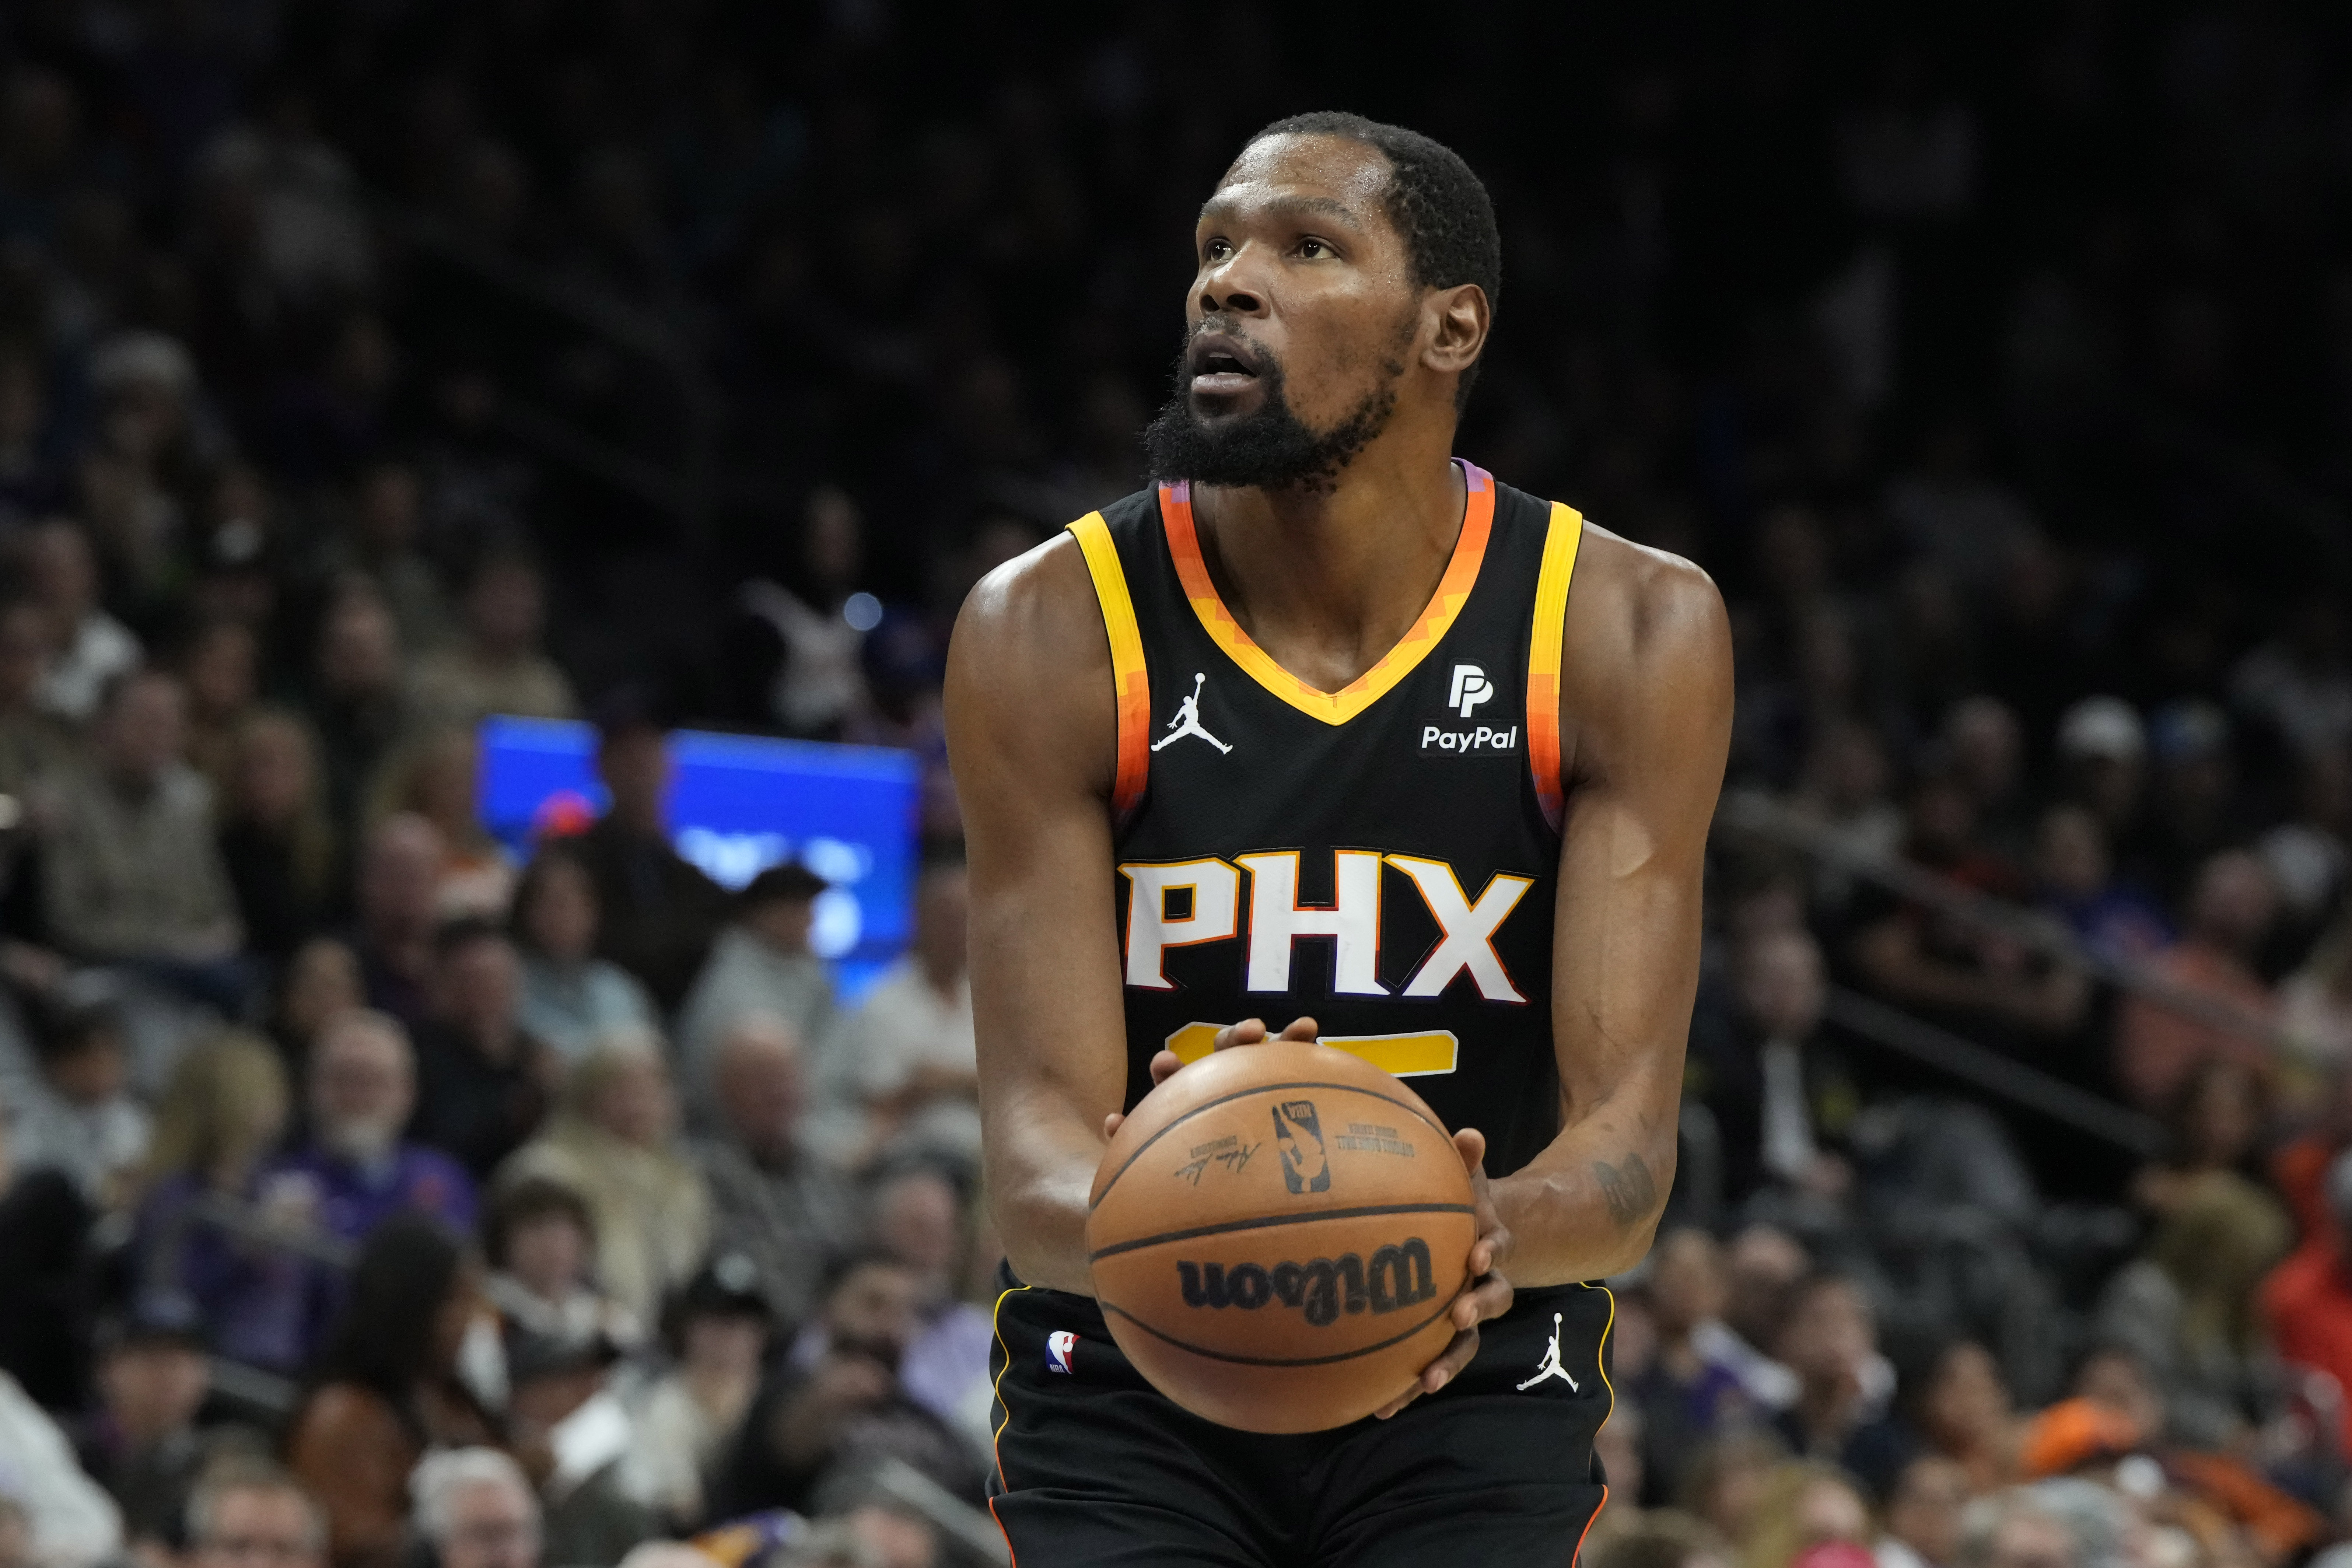 Phoenix Suns forward Kevin Durant (35) shoots a technical foul against the New York Knicks in the first half at Footprint Center